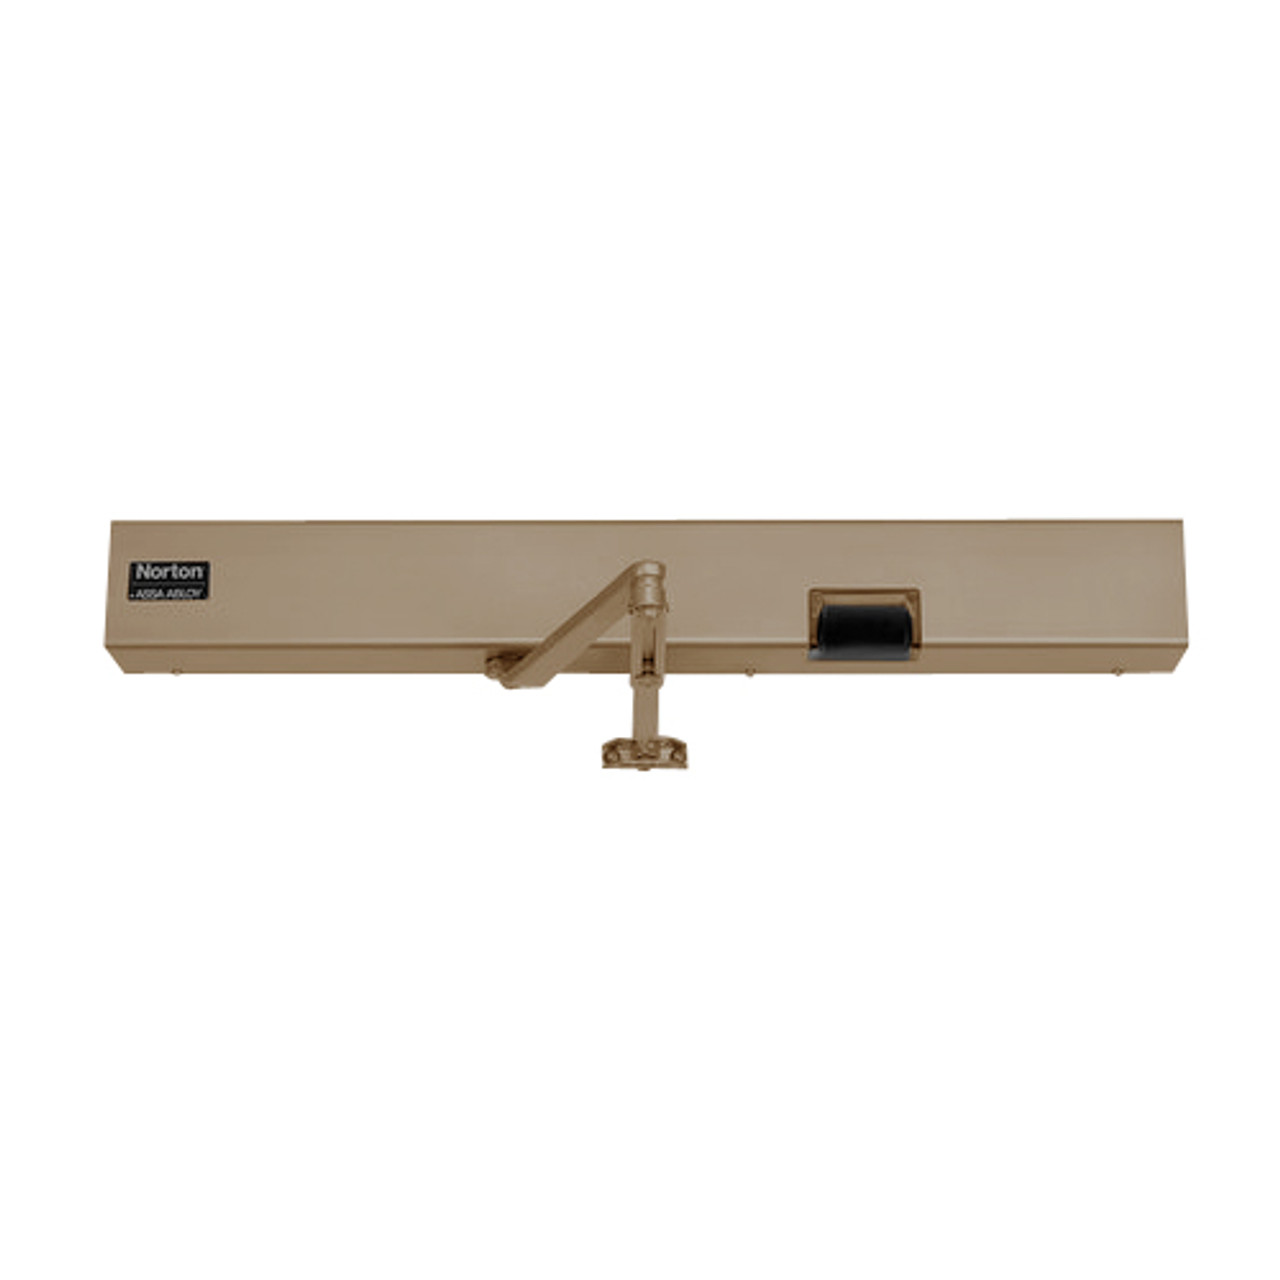 7125SZ-DZ-LH-120VAC-691 Norton 7100SZ Series Safe Zone Multi-Point Closer/Holder with Motion Sensor and Push Side Double Lever 11 inch Main Arm in Dull Bronze Finish